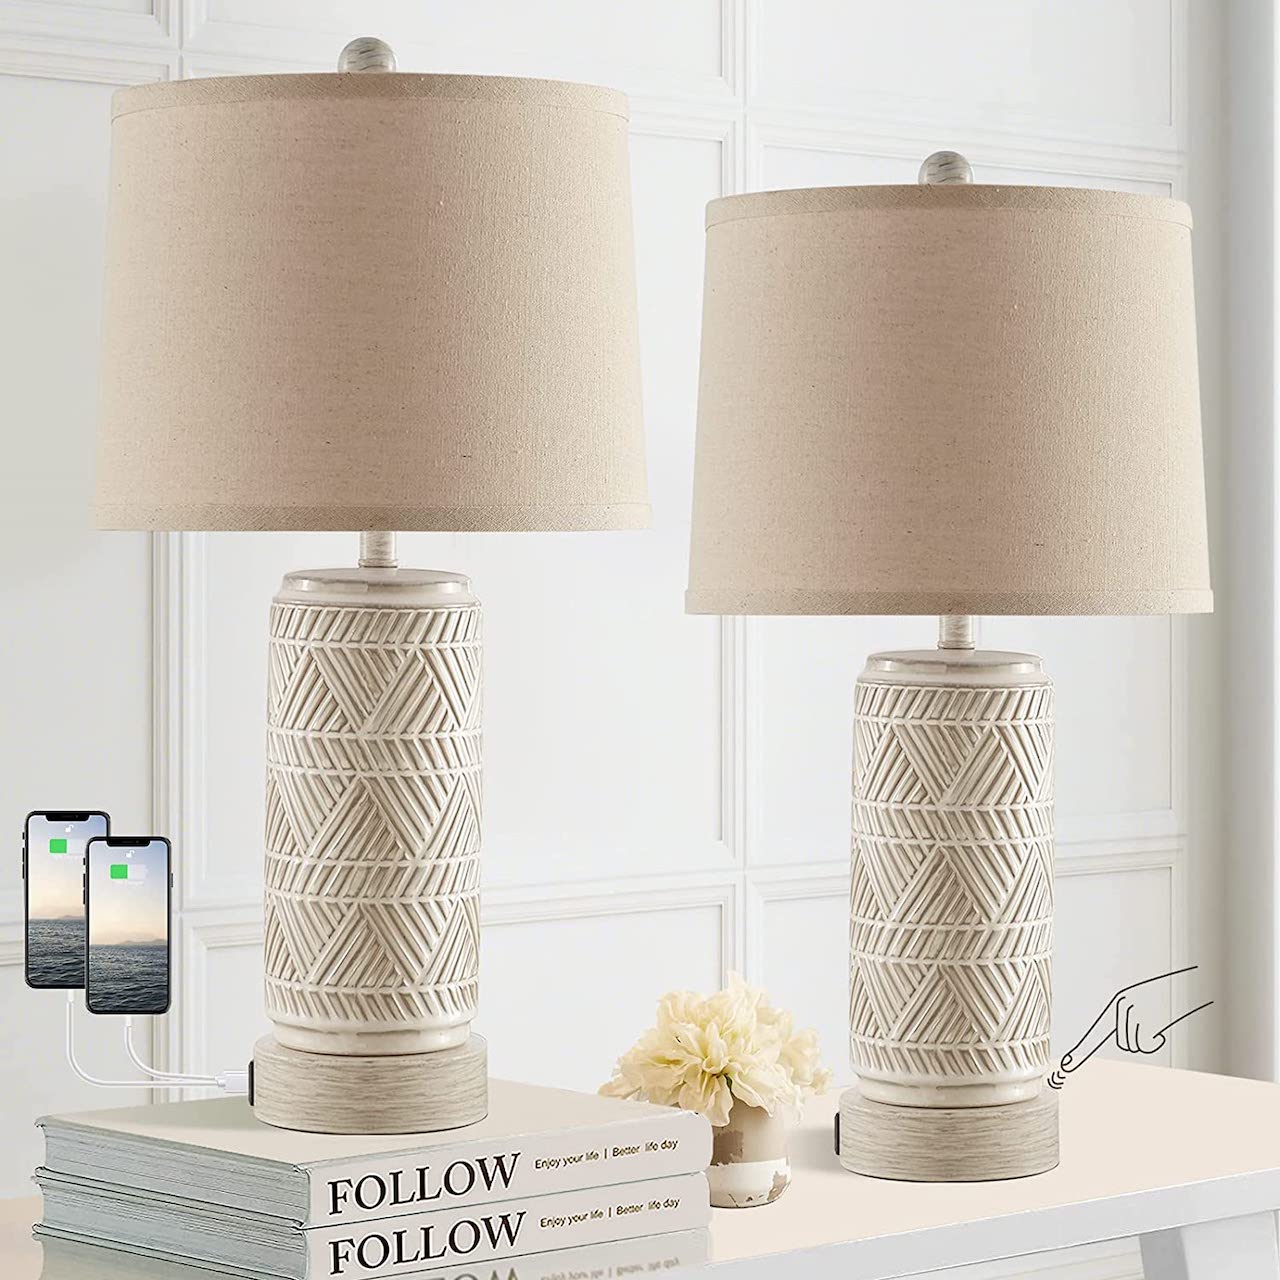 office-decor-to-boost-energy_touch-lamps